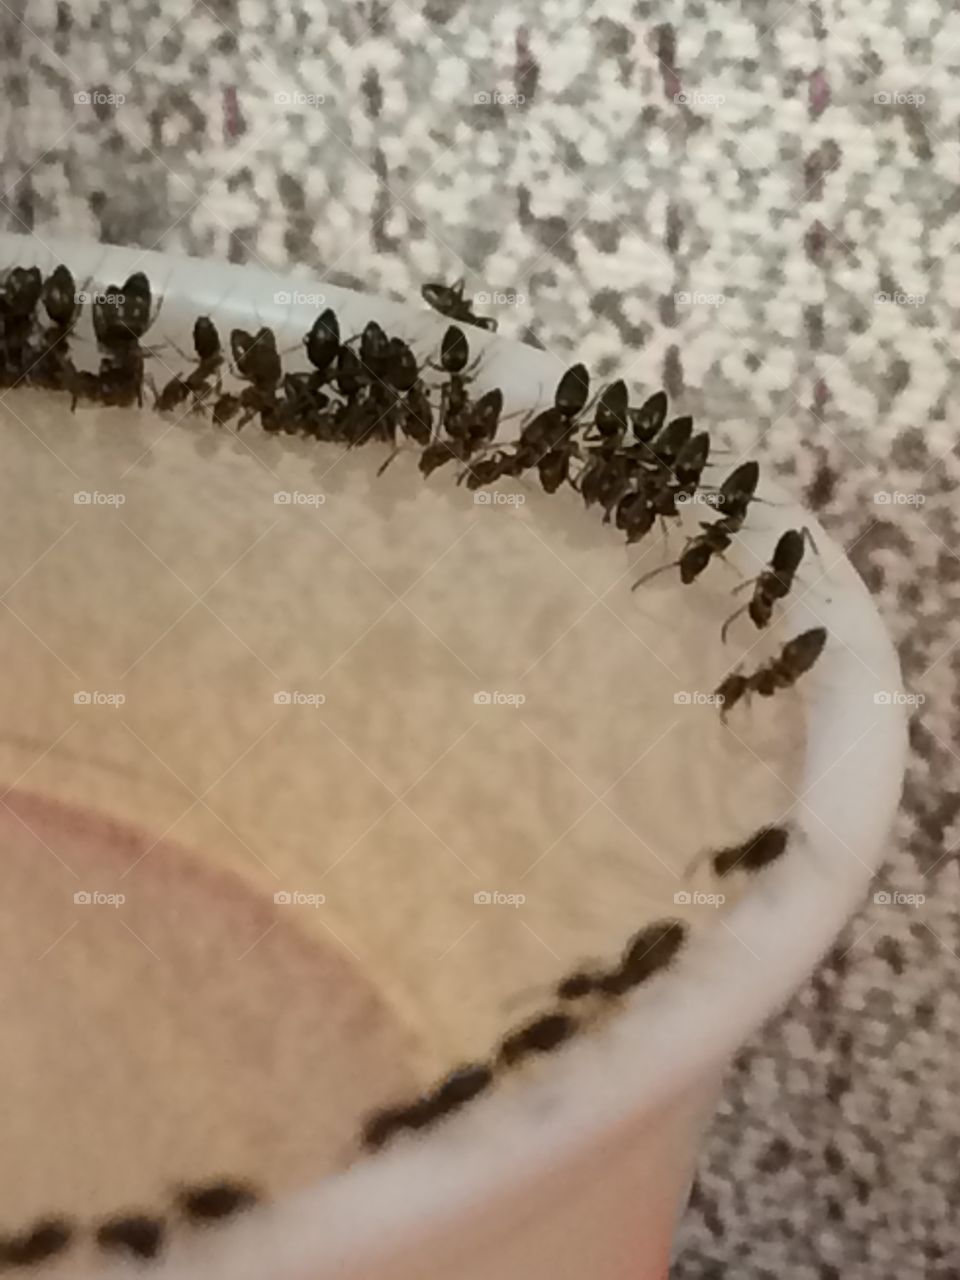 Ants eating from a cup